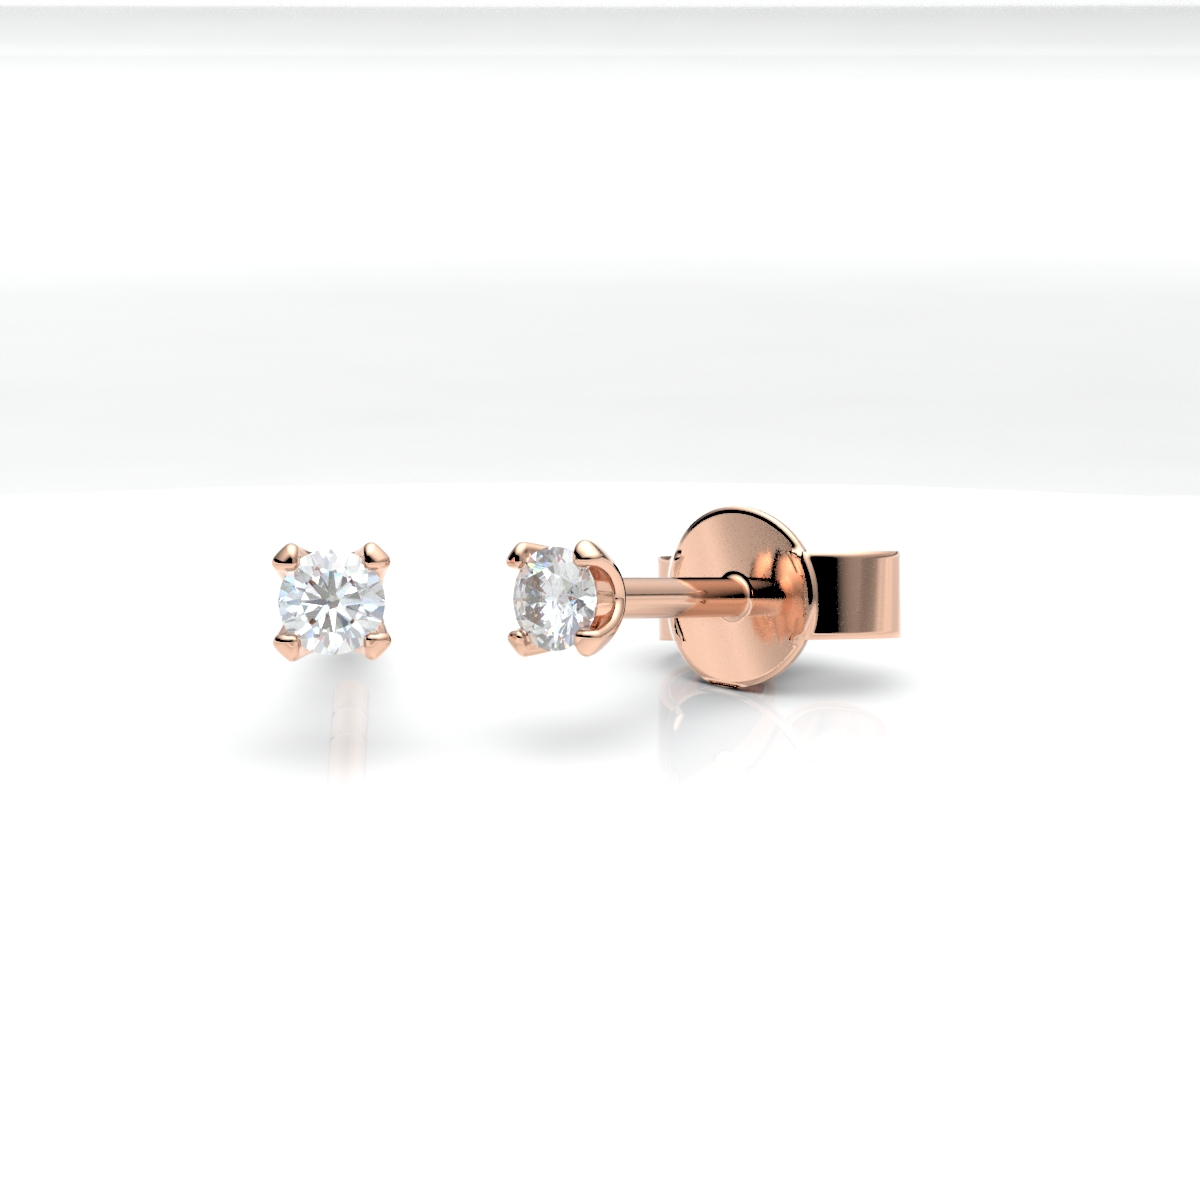 012502-5H24-001 | Ohrstecker Berlin 012502 585 Roségold<br> Brillant 0,100 ct H-SI ∅ 2.4mm<br>100% Made in Germany  